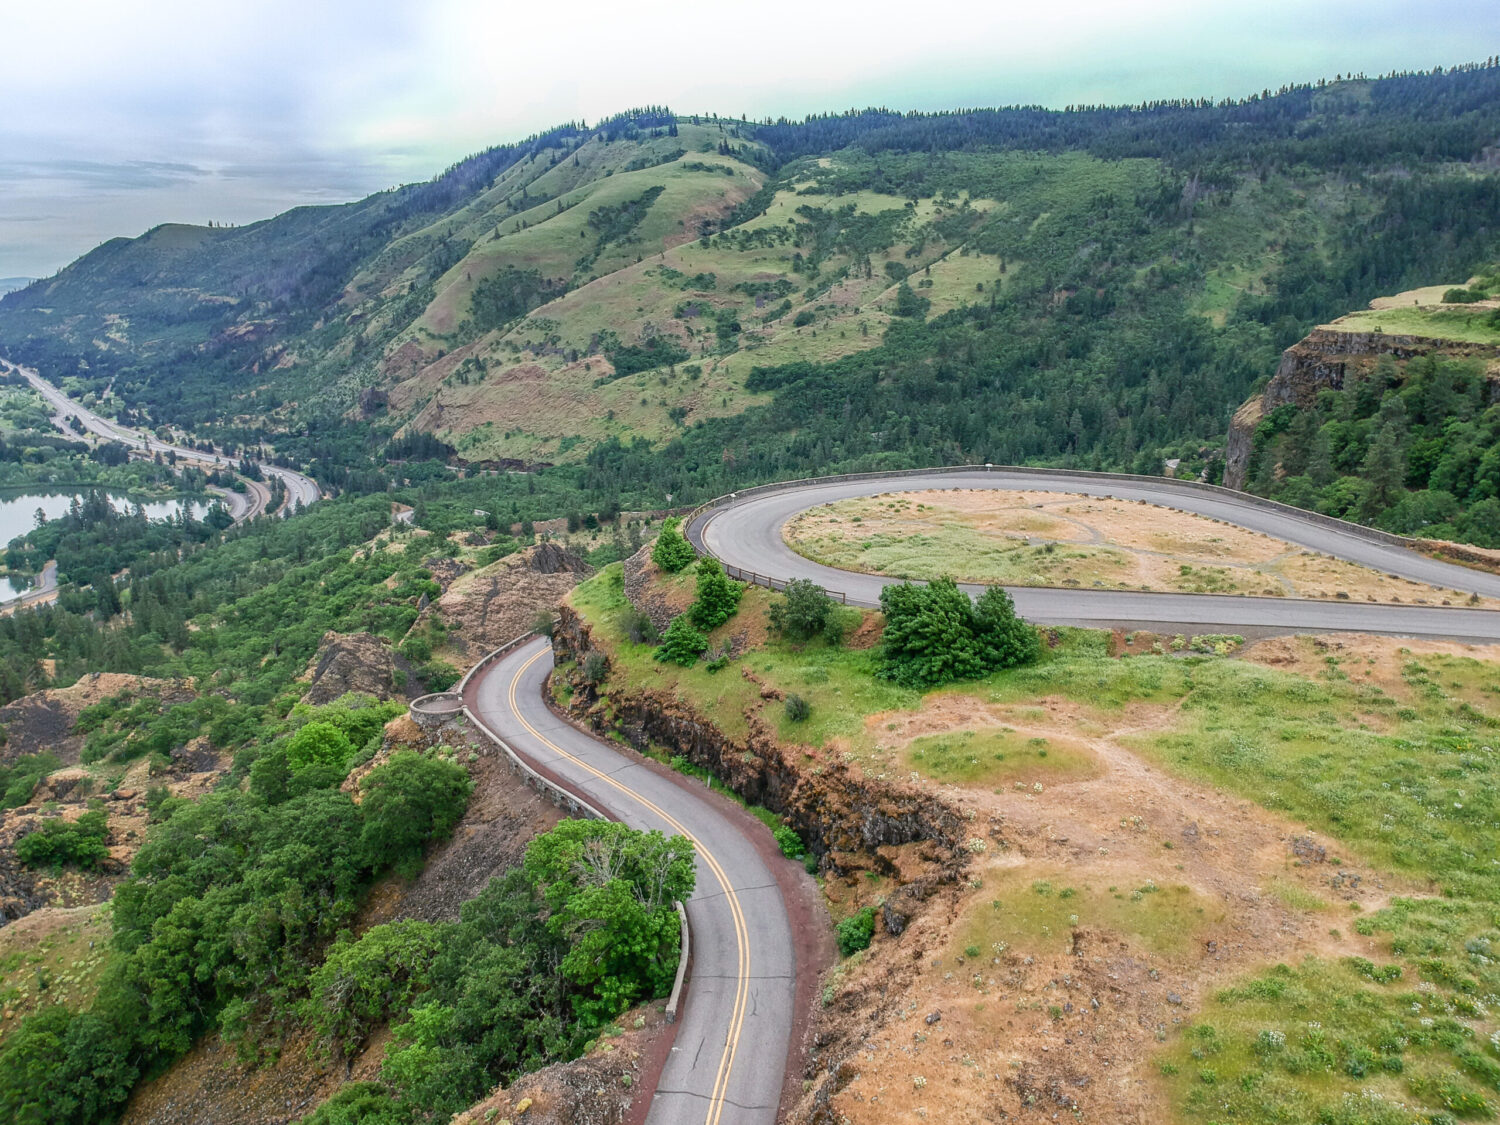 Rowena Crest viewpoint in Oregon